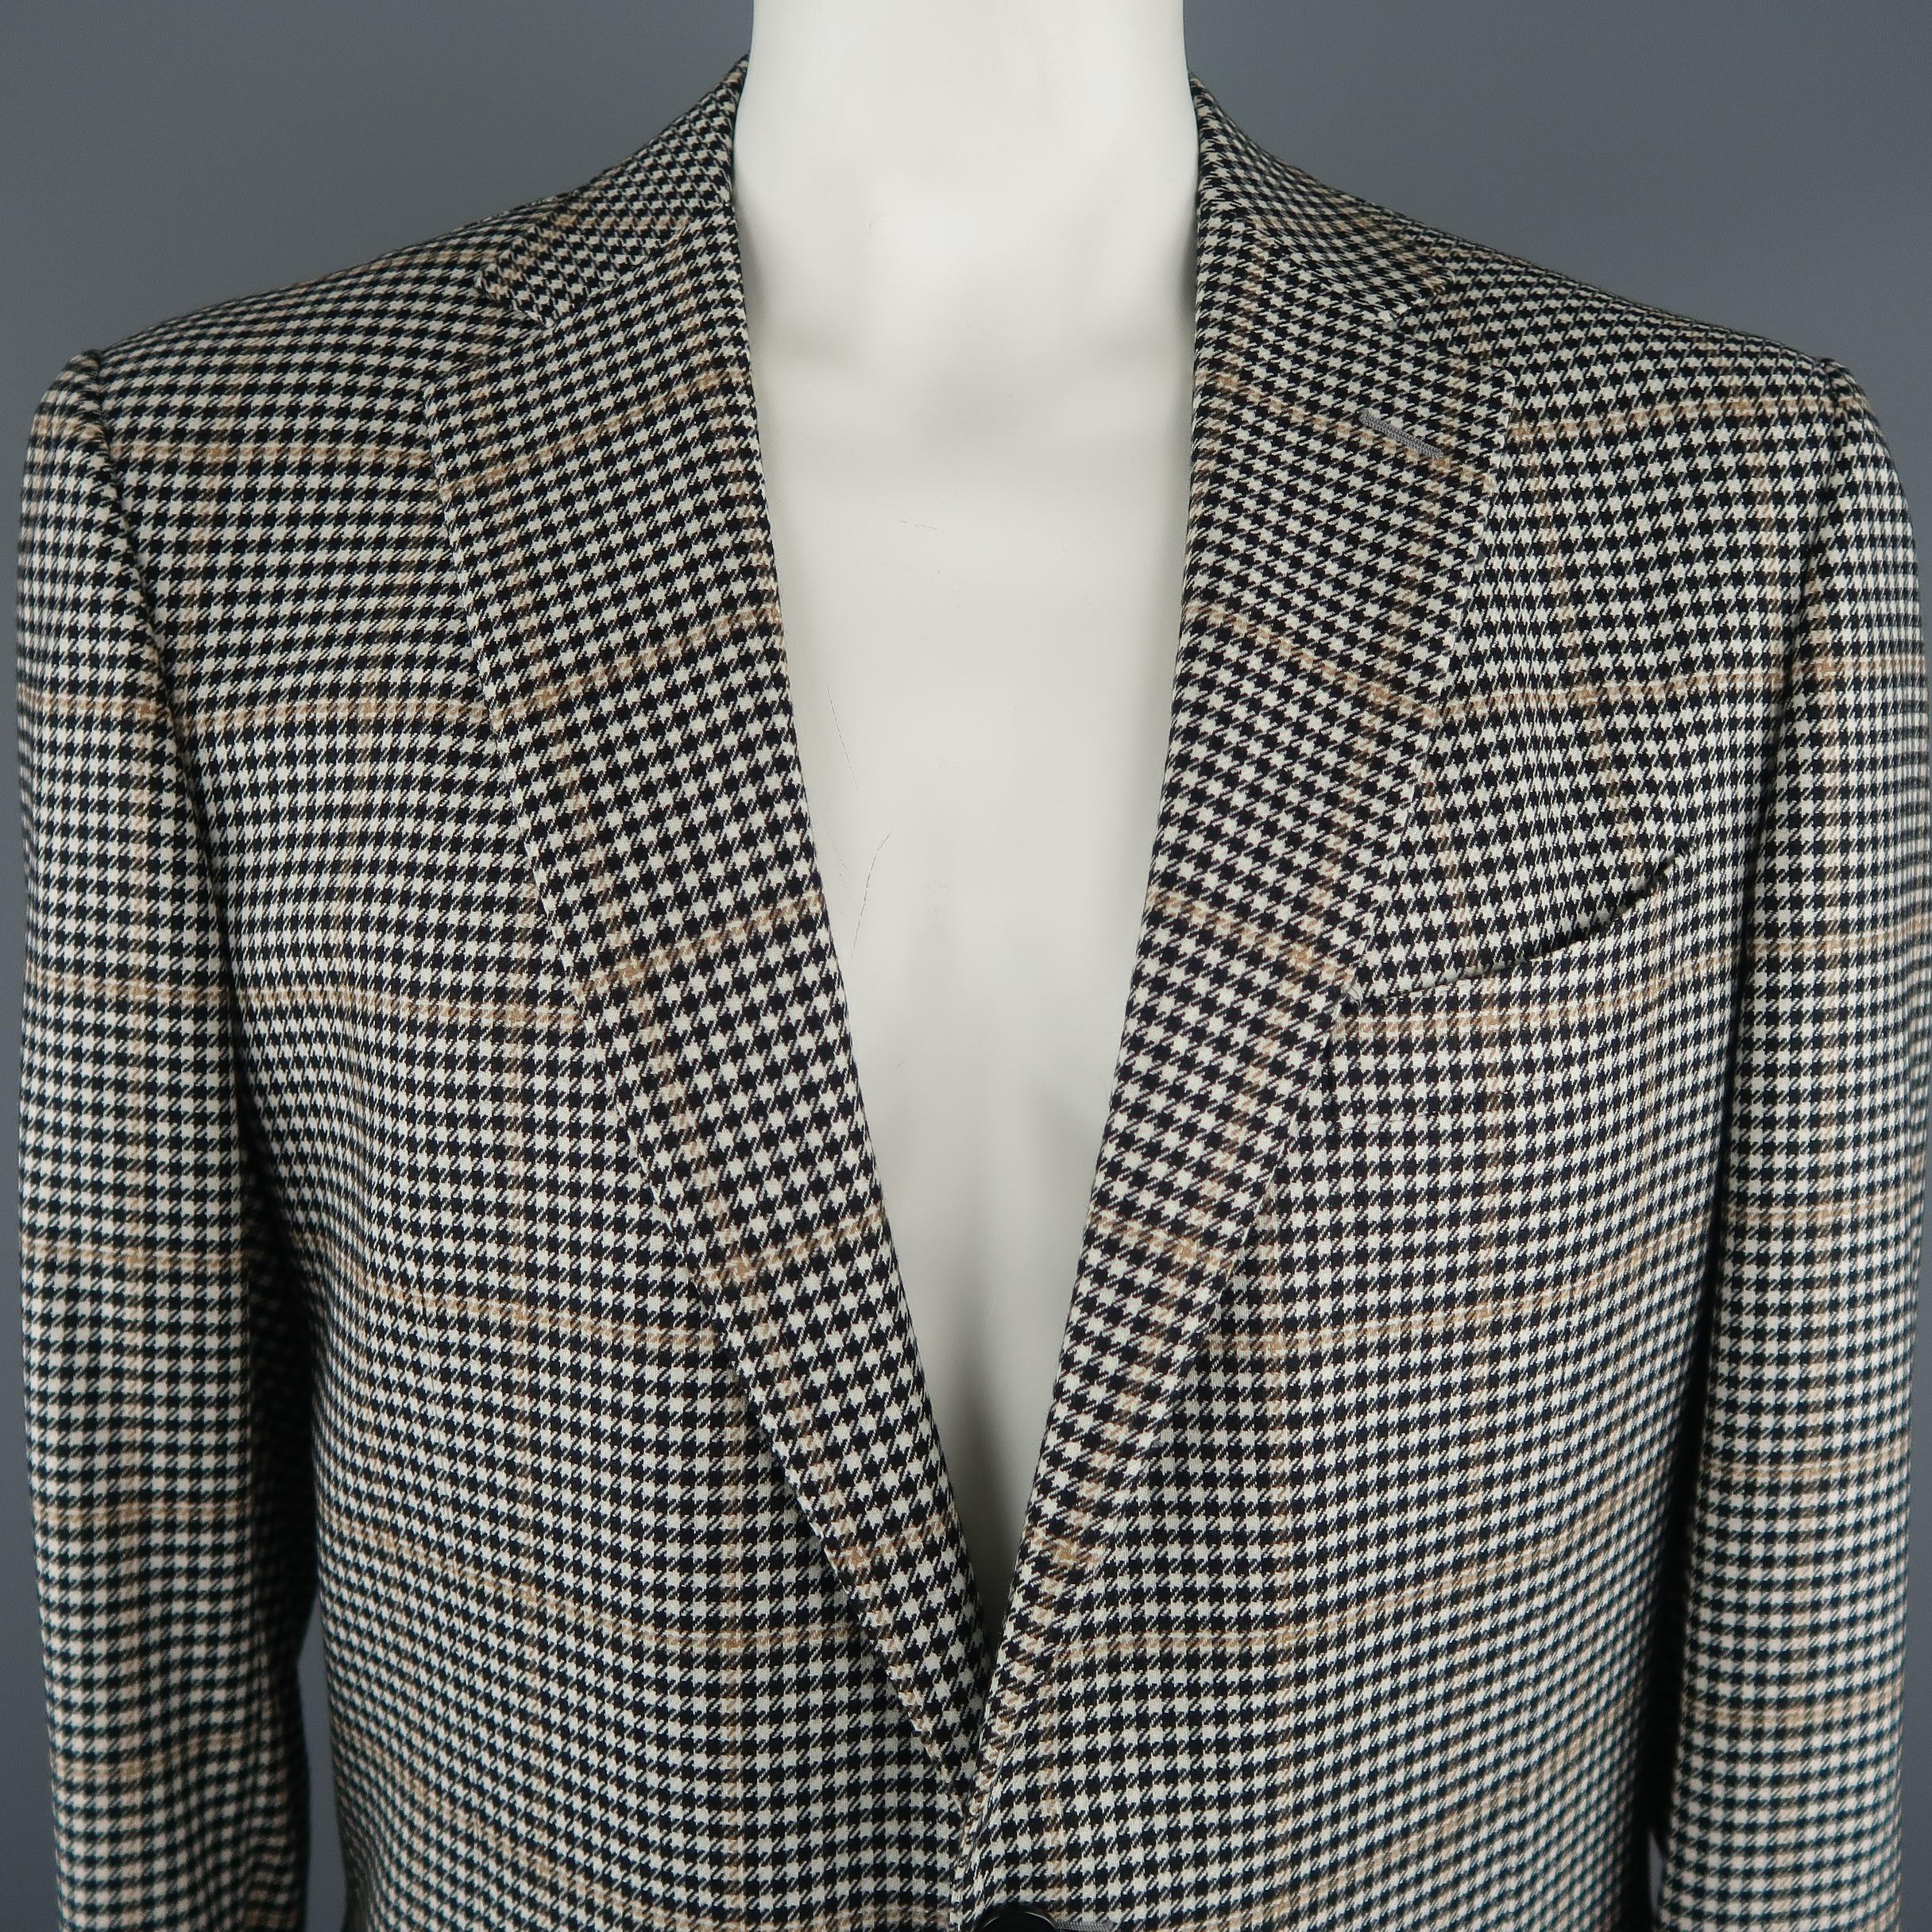 ERMENEGILDO ZEGNA sport coat comes in black and white tones in houndstooth cashmere material, single breasted, with a notch lapel, 2 buttons at closure and slit pockets. Made in Switzerland.
 
Excellent  Pre-Owned Condition.
Marked: 58R
